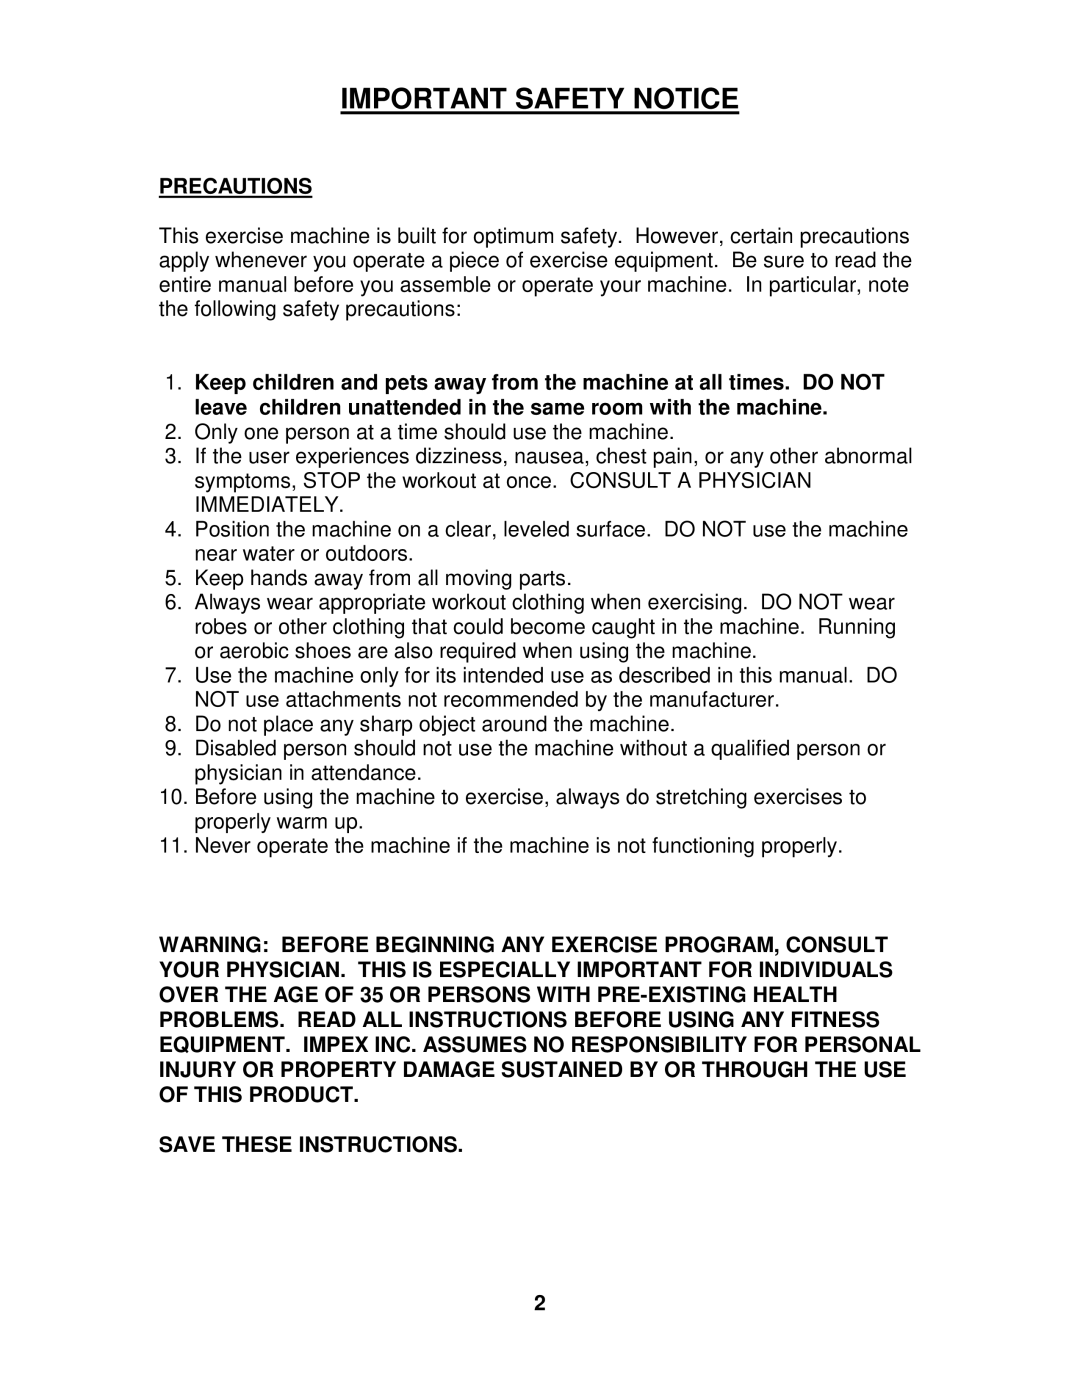 Impex JD 3 manual Important Safety Notice, Precautions 